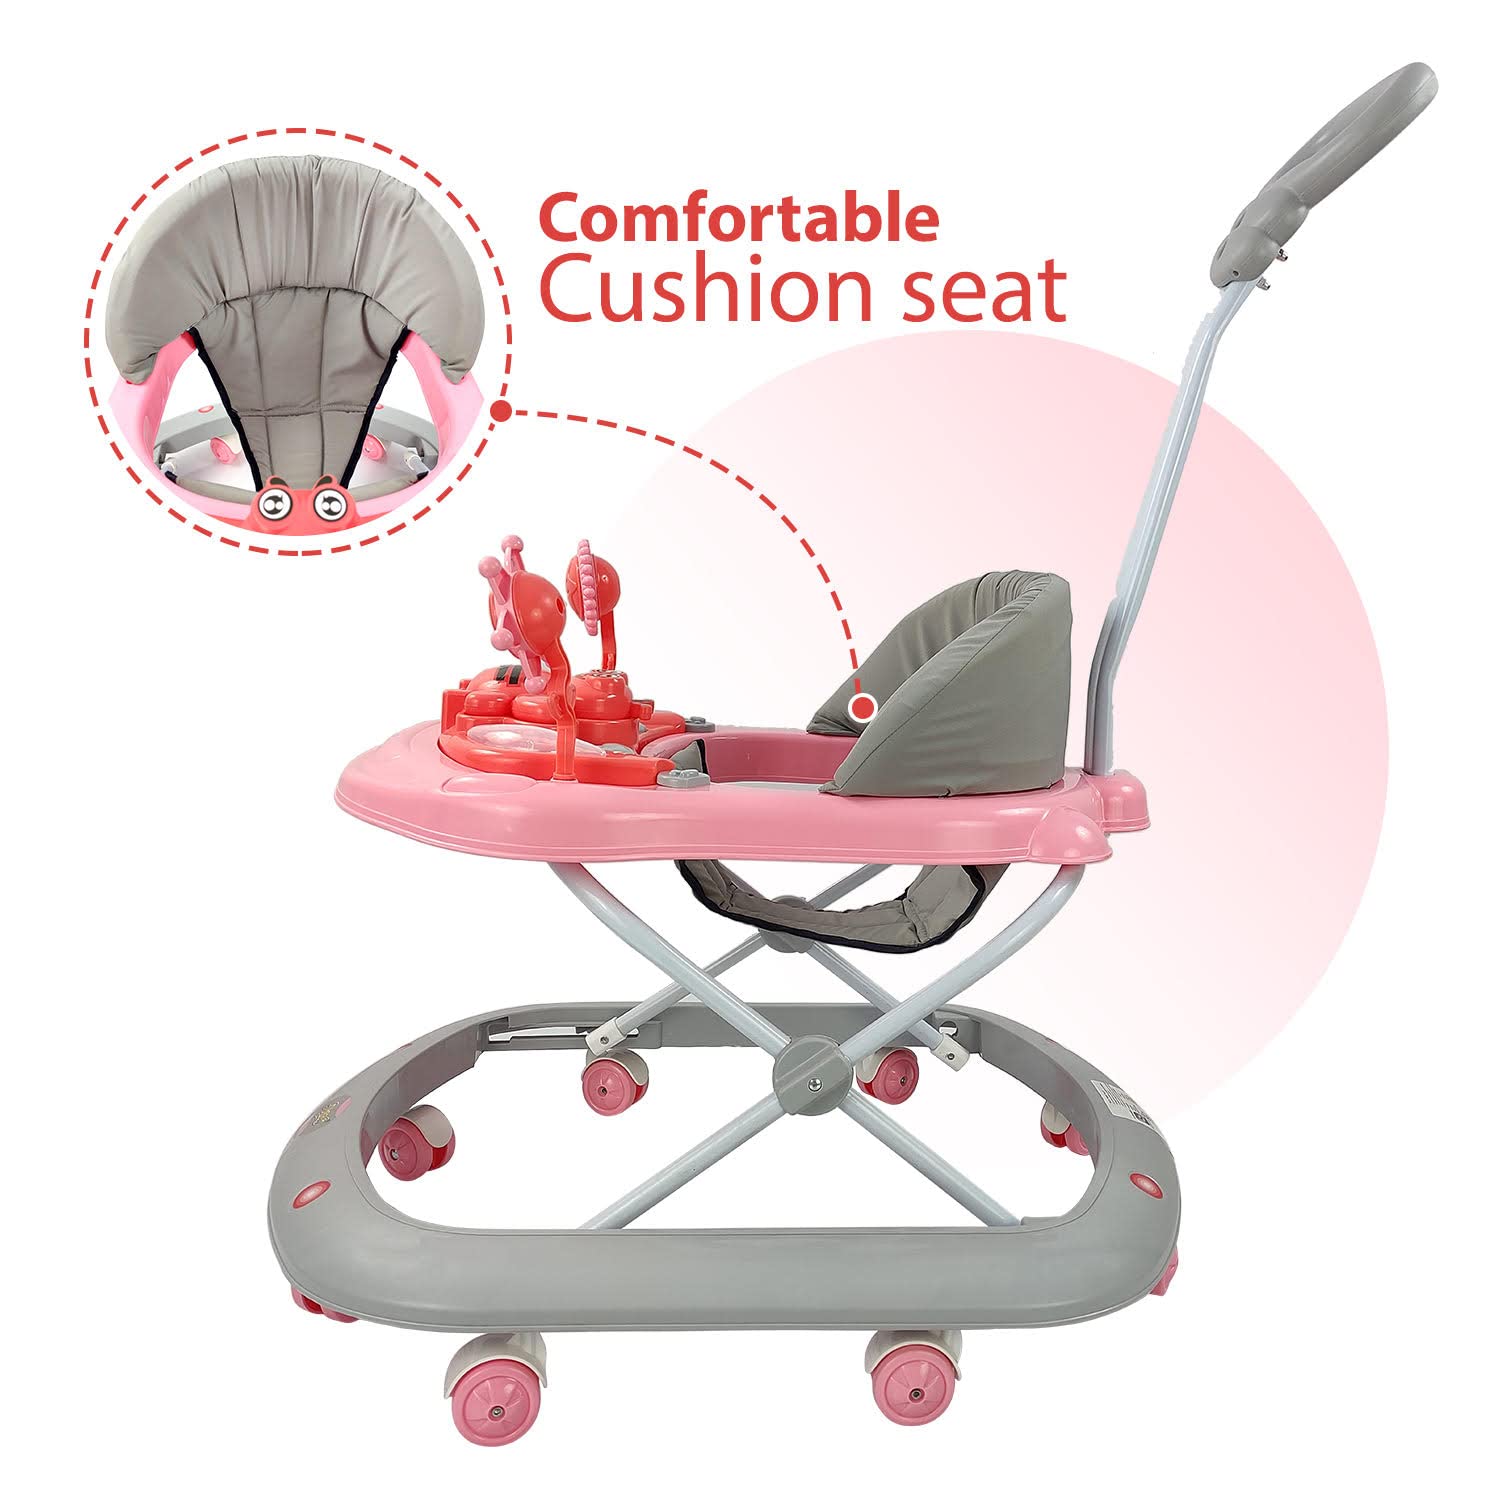 Butterfly Deluxe Baby Walker with 3 Position Adjustable Height Music & Light & Parental Handle, Foldable Activity Walker, Baby 6-18 Months boy, Walker for Kids (Capacity 20kg | Pink)